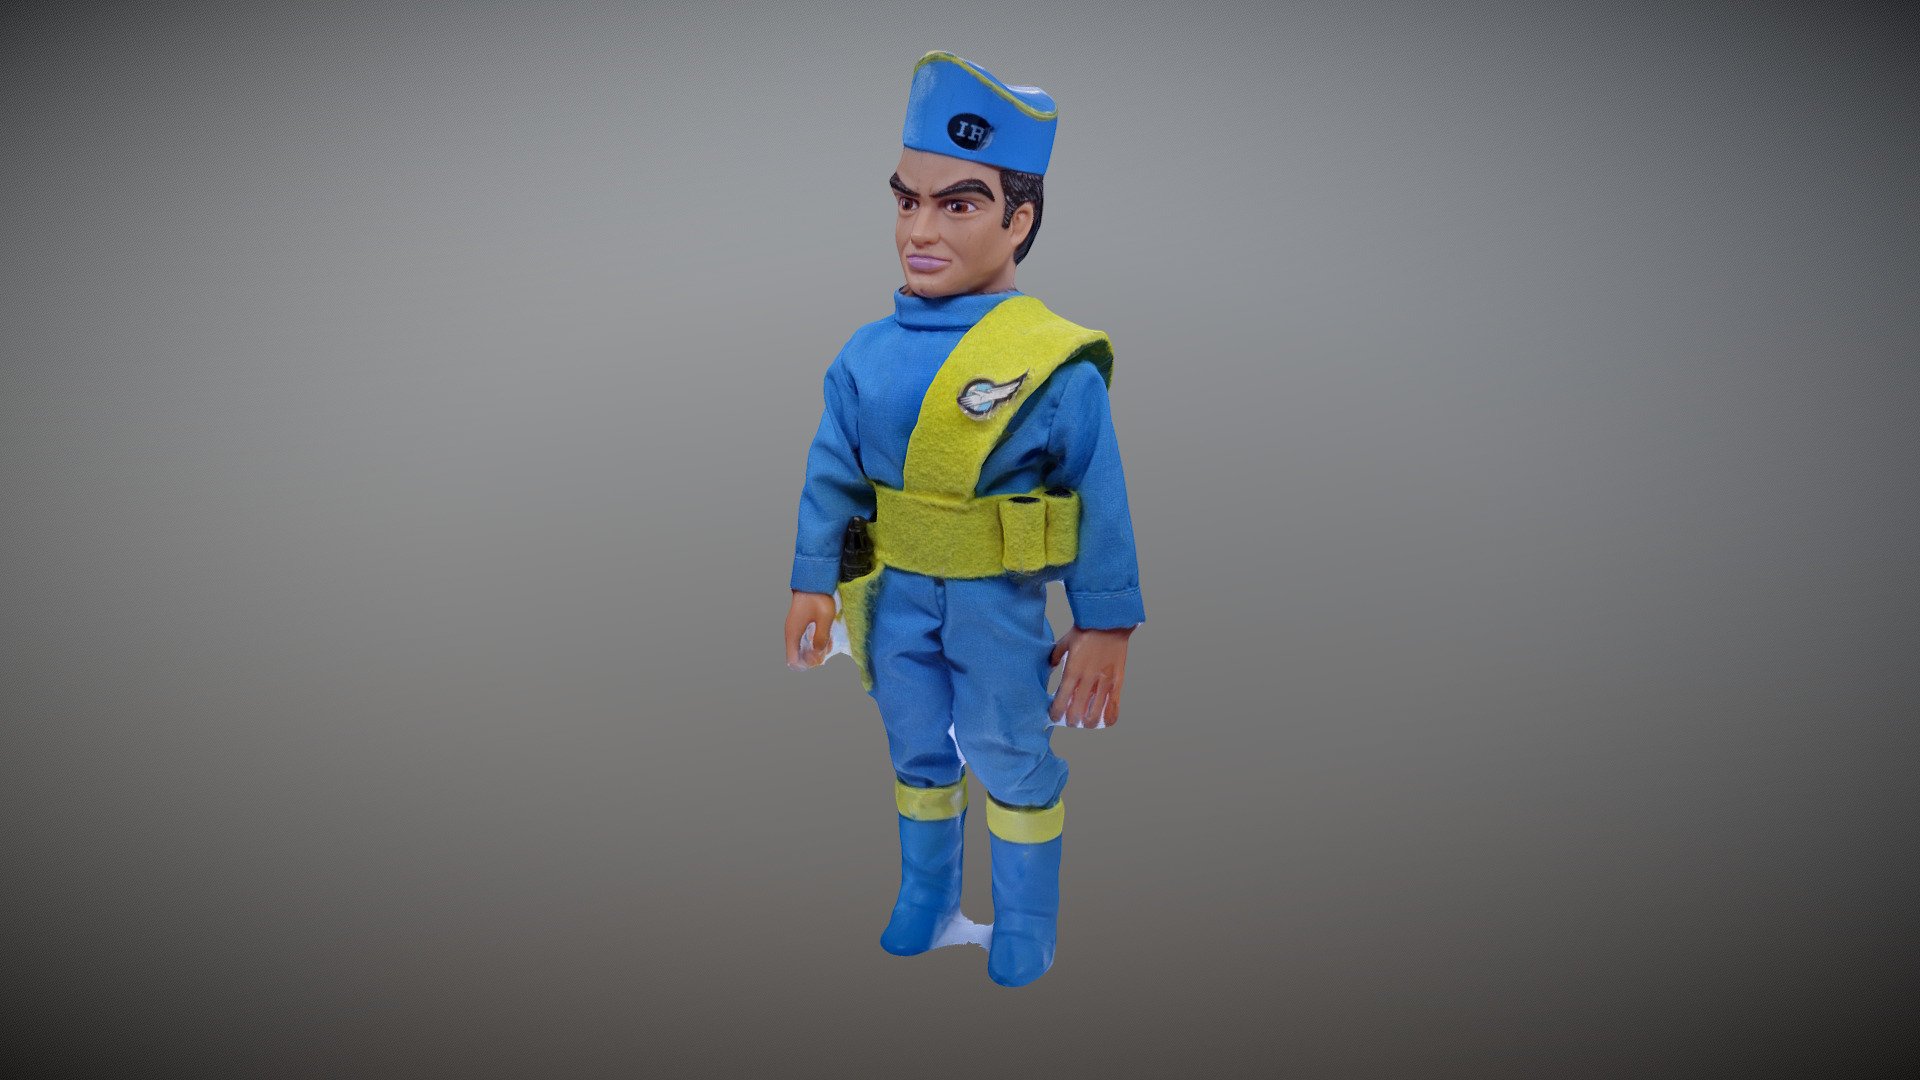 Created with Polycam - Thunderbirds Toy - 3D model by Michael Douglass (@drmdouglass) 3d model